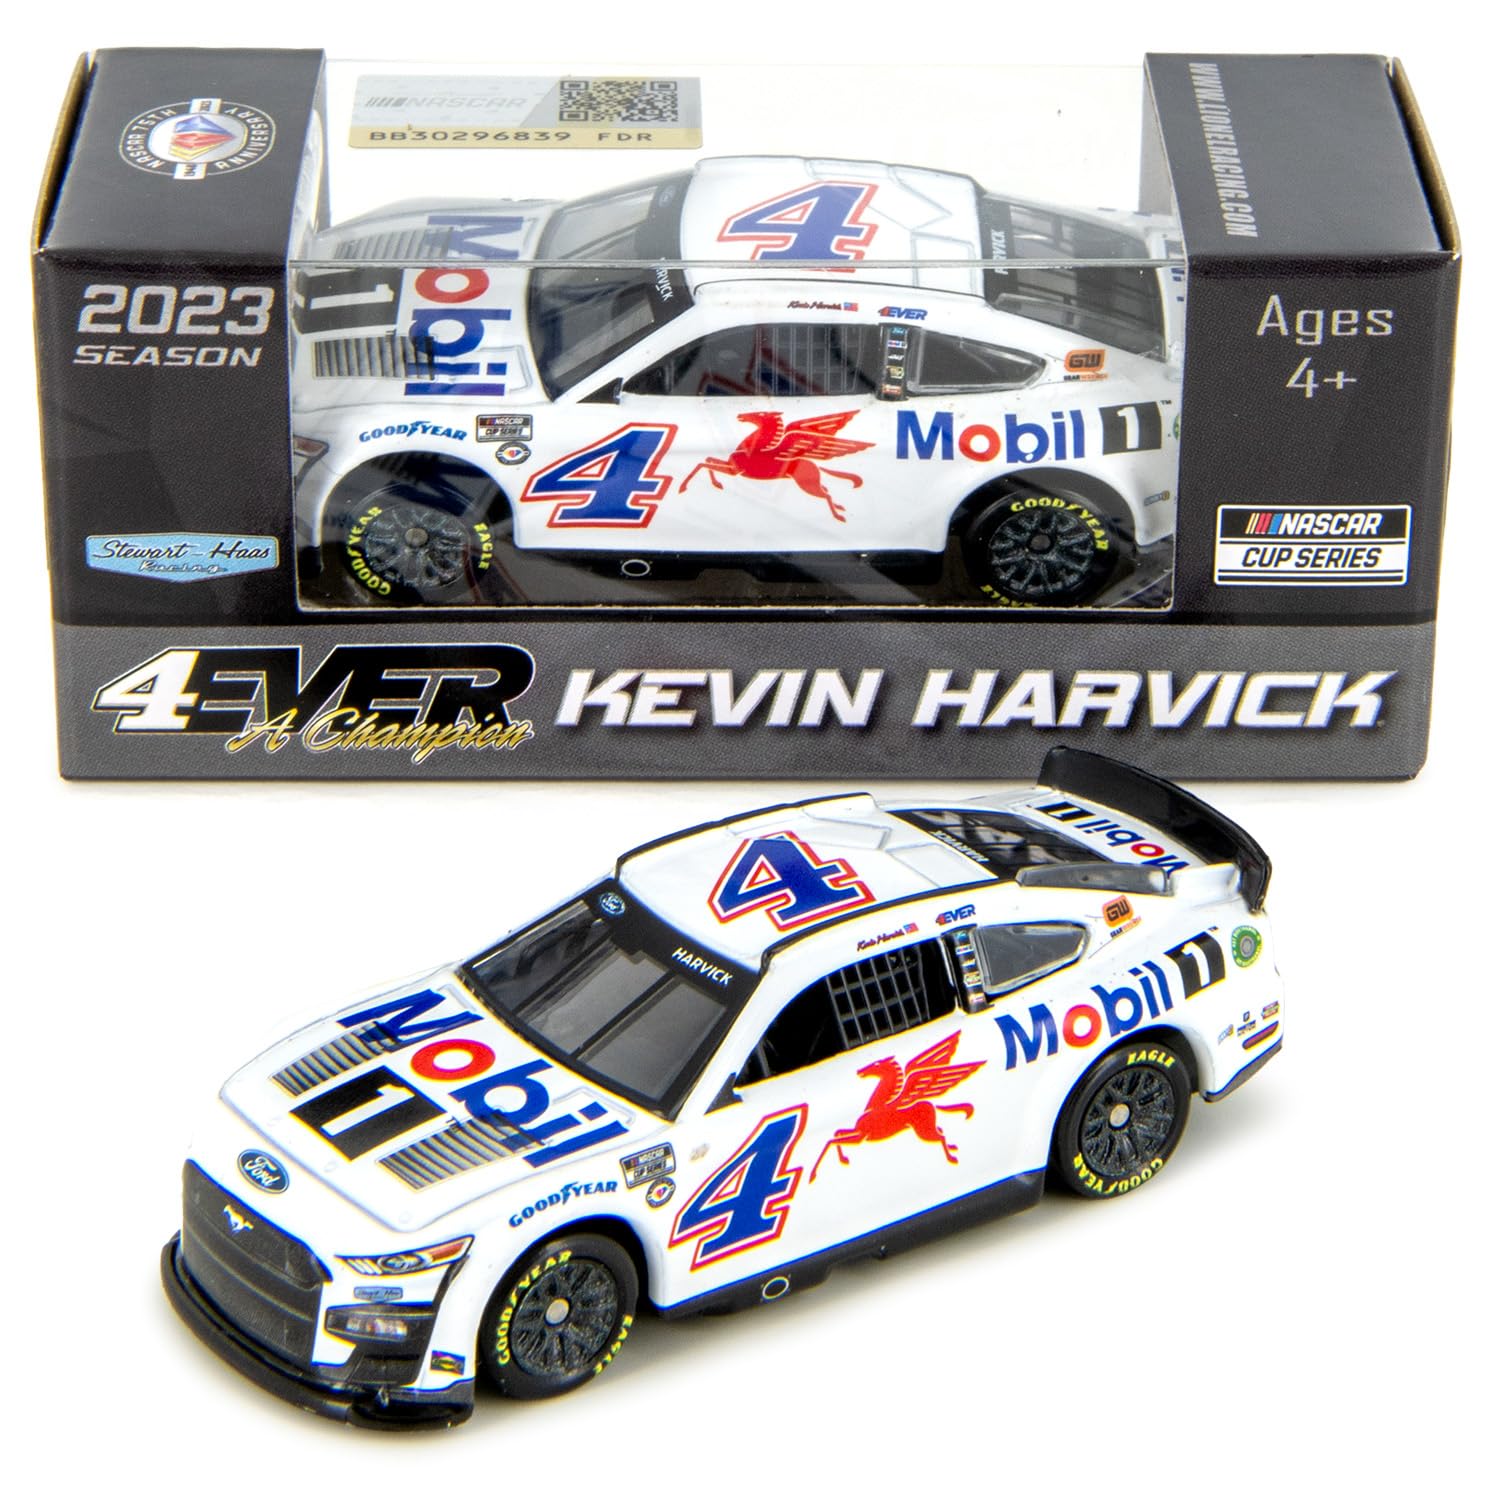 Lionel Racing Kevin Harvick 2023 Mobil 1 Diecast Car 1:64 Scale